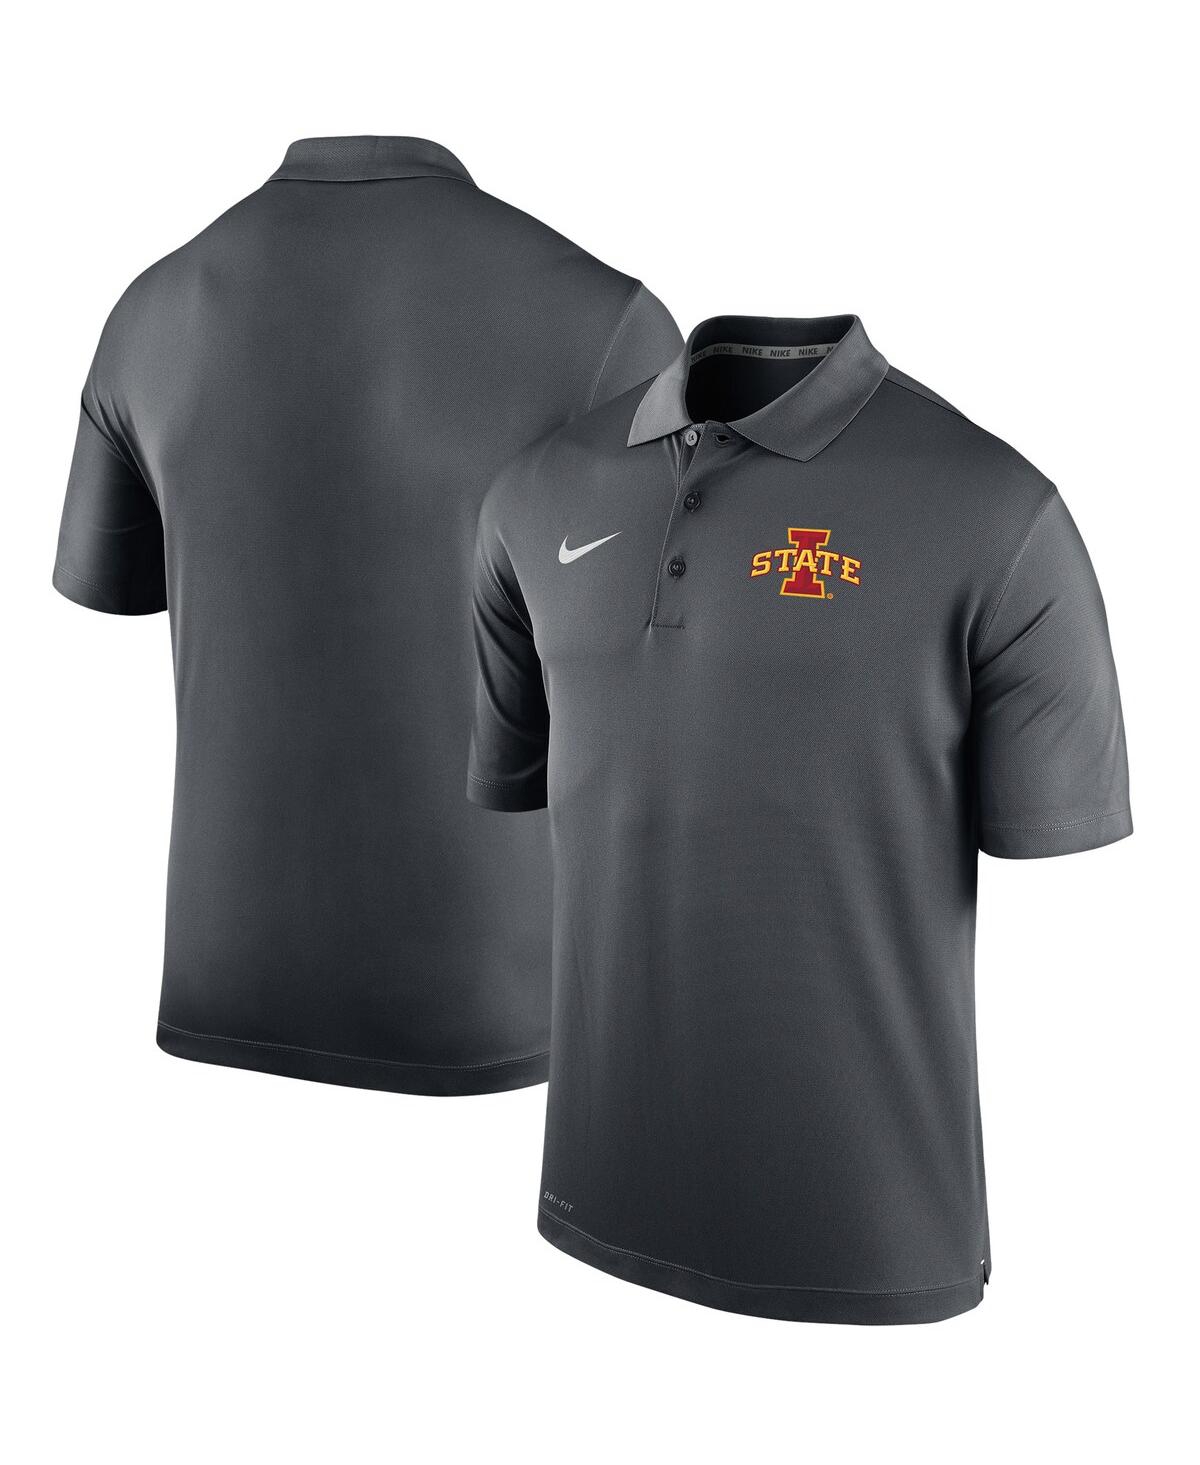 NIKE MEN'S NIKE ANTHRACITE IOWA STATE CYCLONES BIG AND TALL PRIMARY LOGO VARSITY PERFORMANCE POLO SHIRT